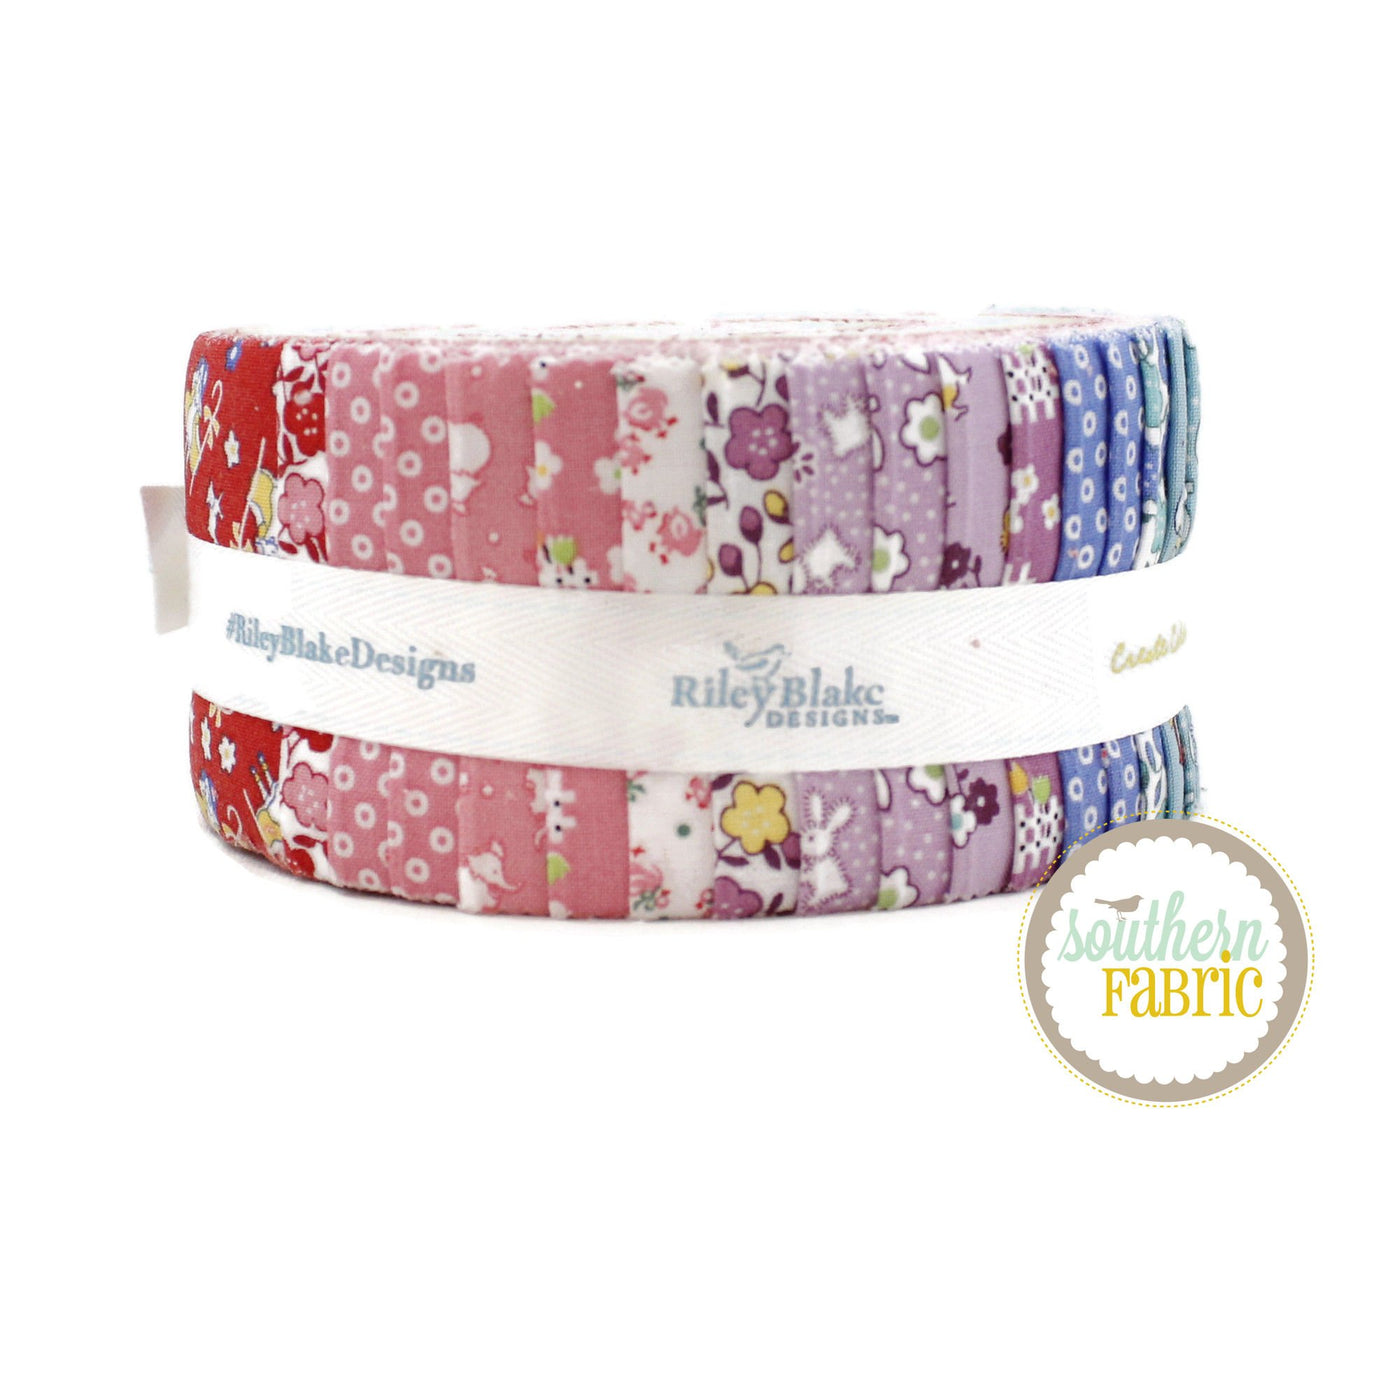 Storytime 30's Jelly Roll (40 pcs) by RBD Designs for Riley Blake (RP-13860-40)